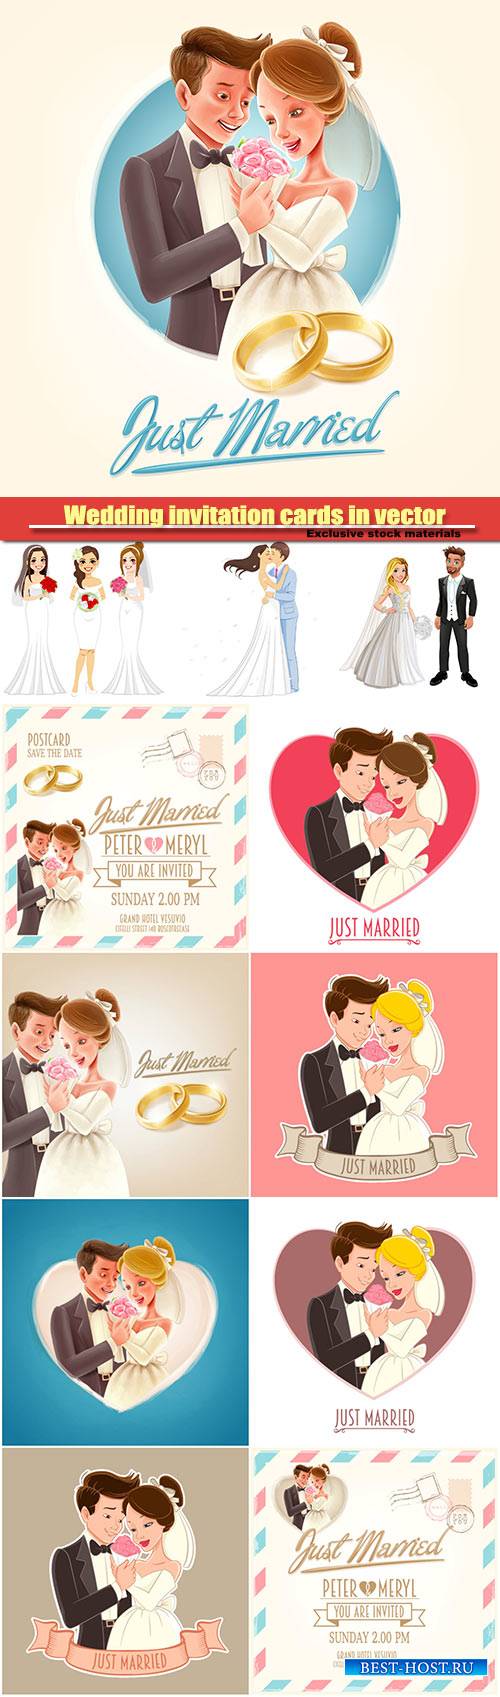 Wedding invitation cards in vector, bride and groom, couple in love